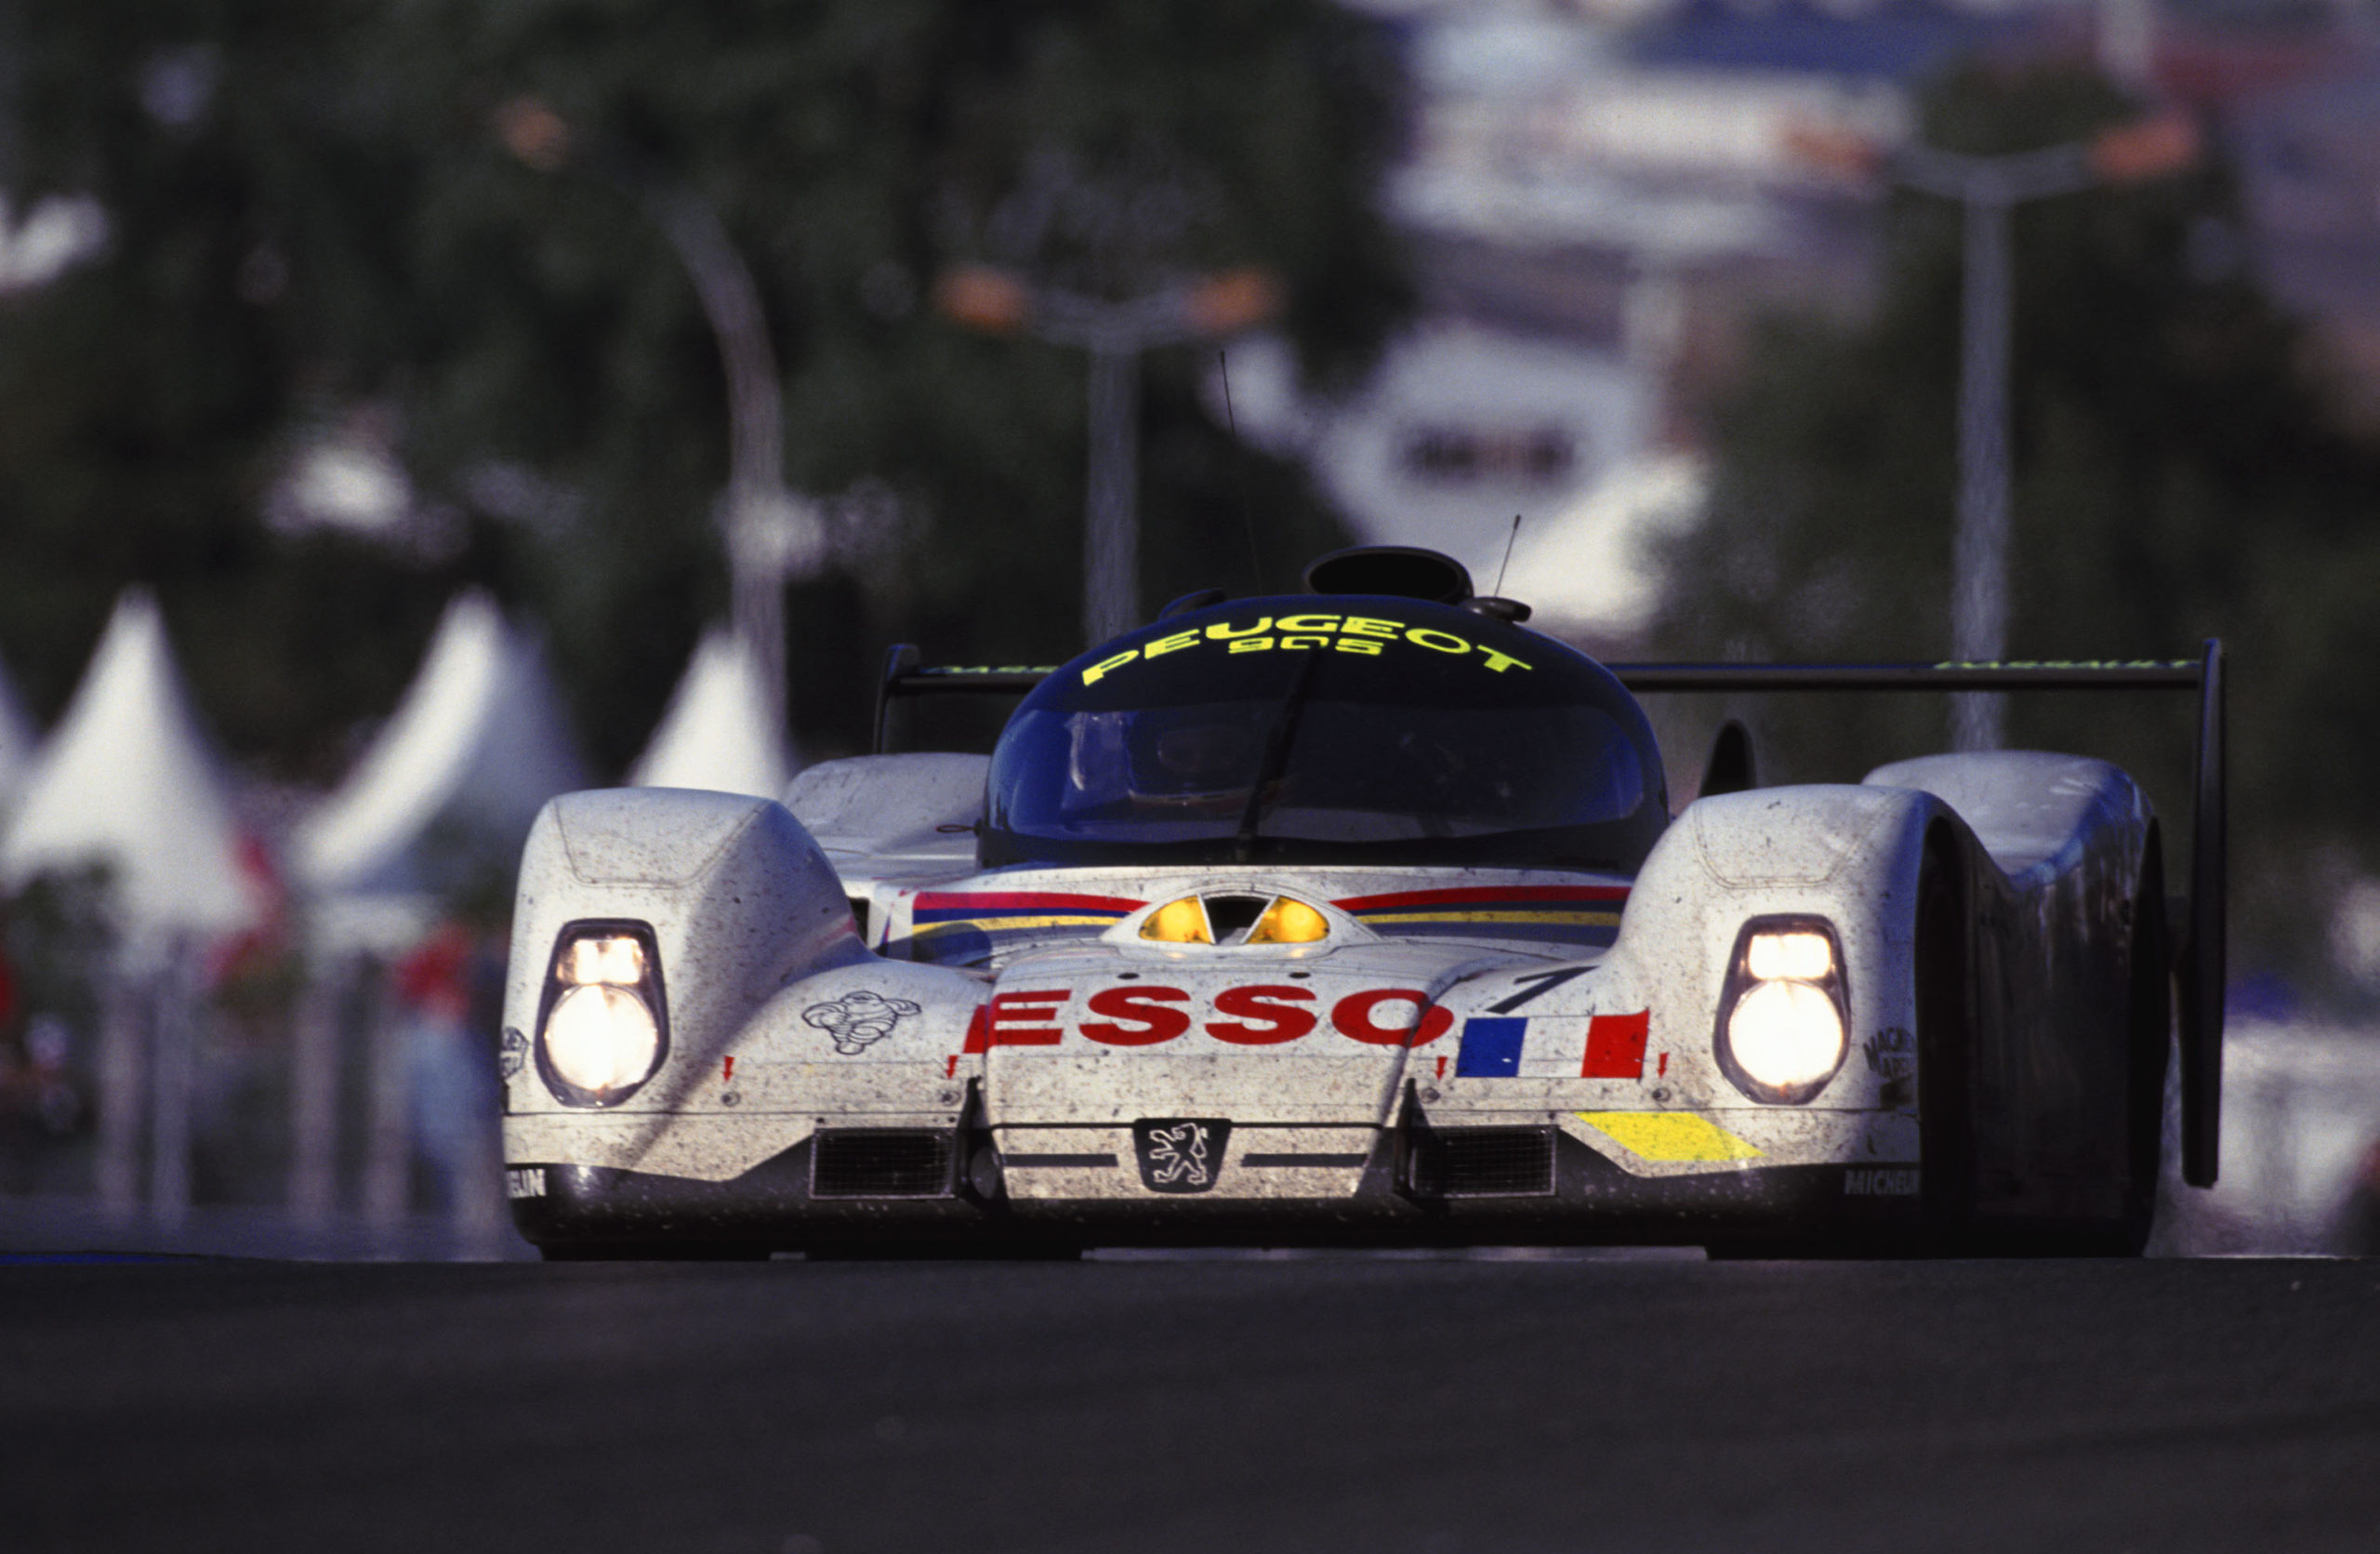 8-Peugeot-Oxia-24h-Le-Mans-scaled